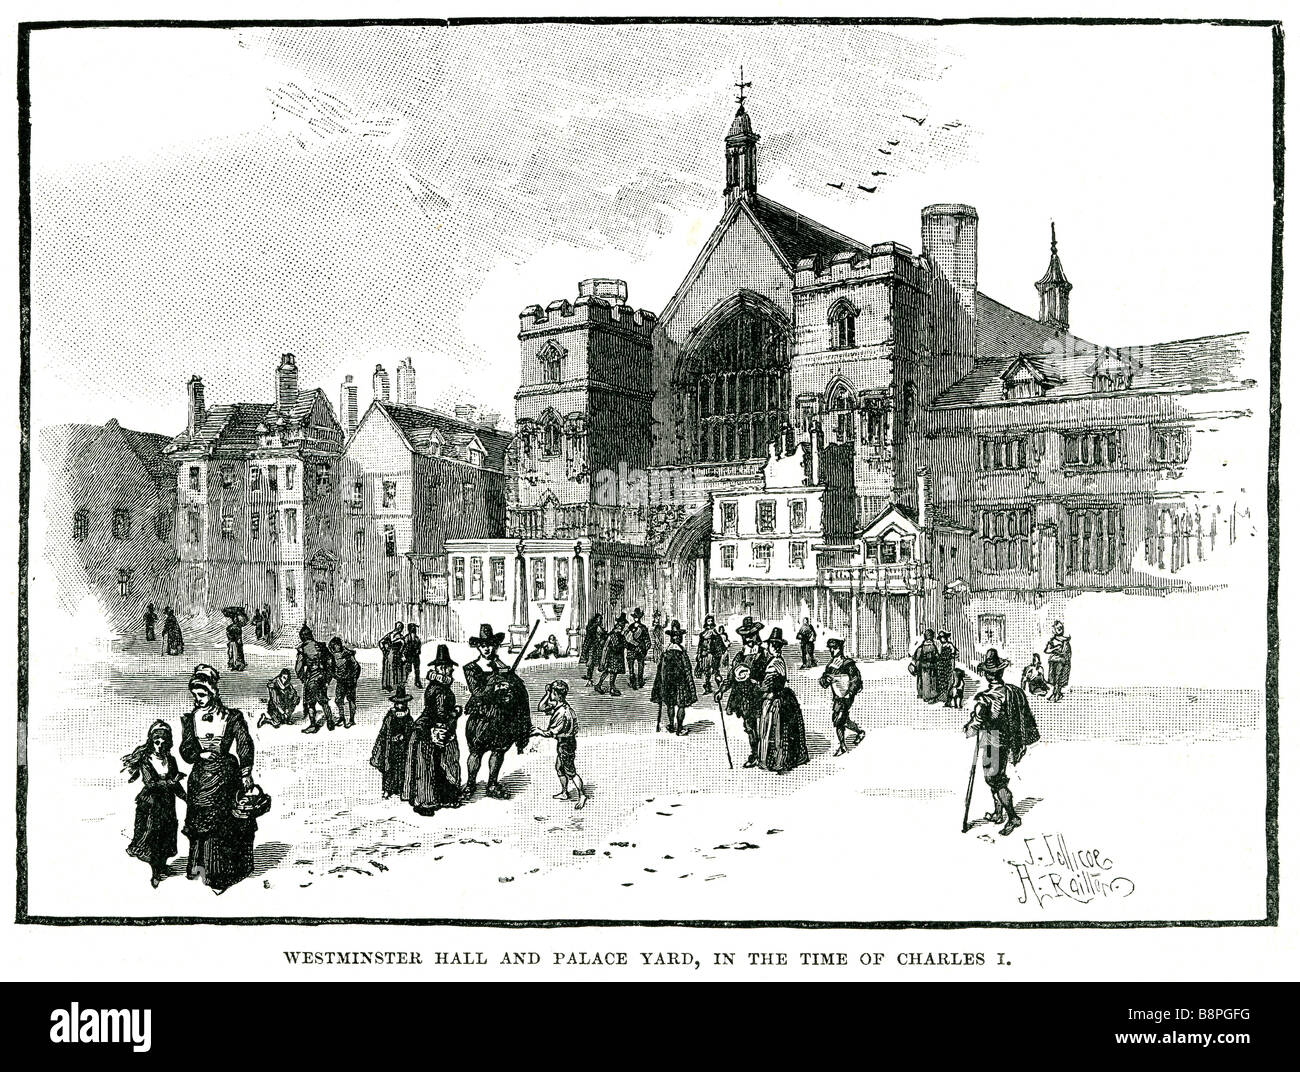 westminster hall and palace yard in the time of charles I Westminster Hall, the oldest existing part of the Palace of Westminste Stock Photo